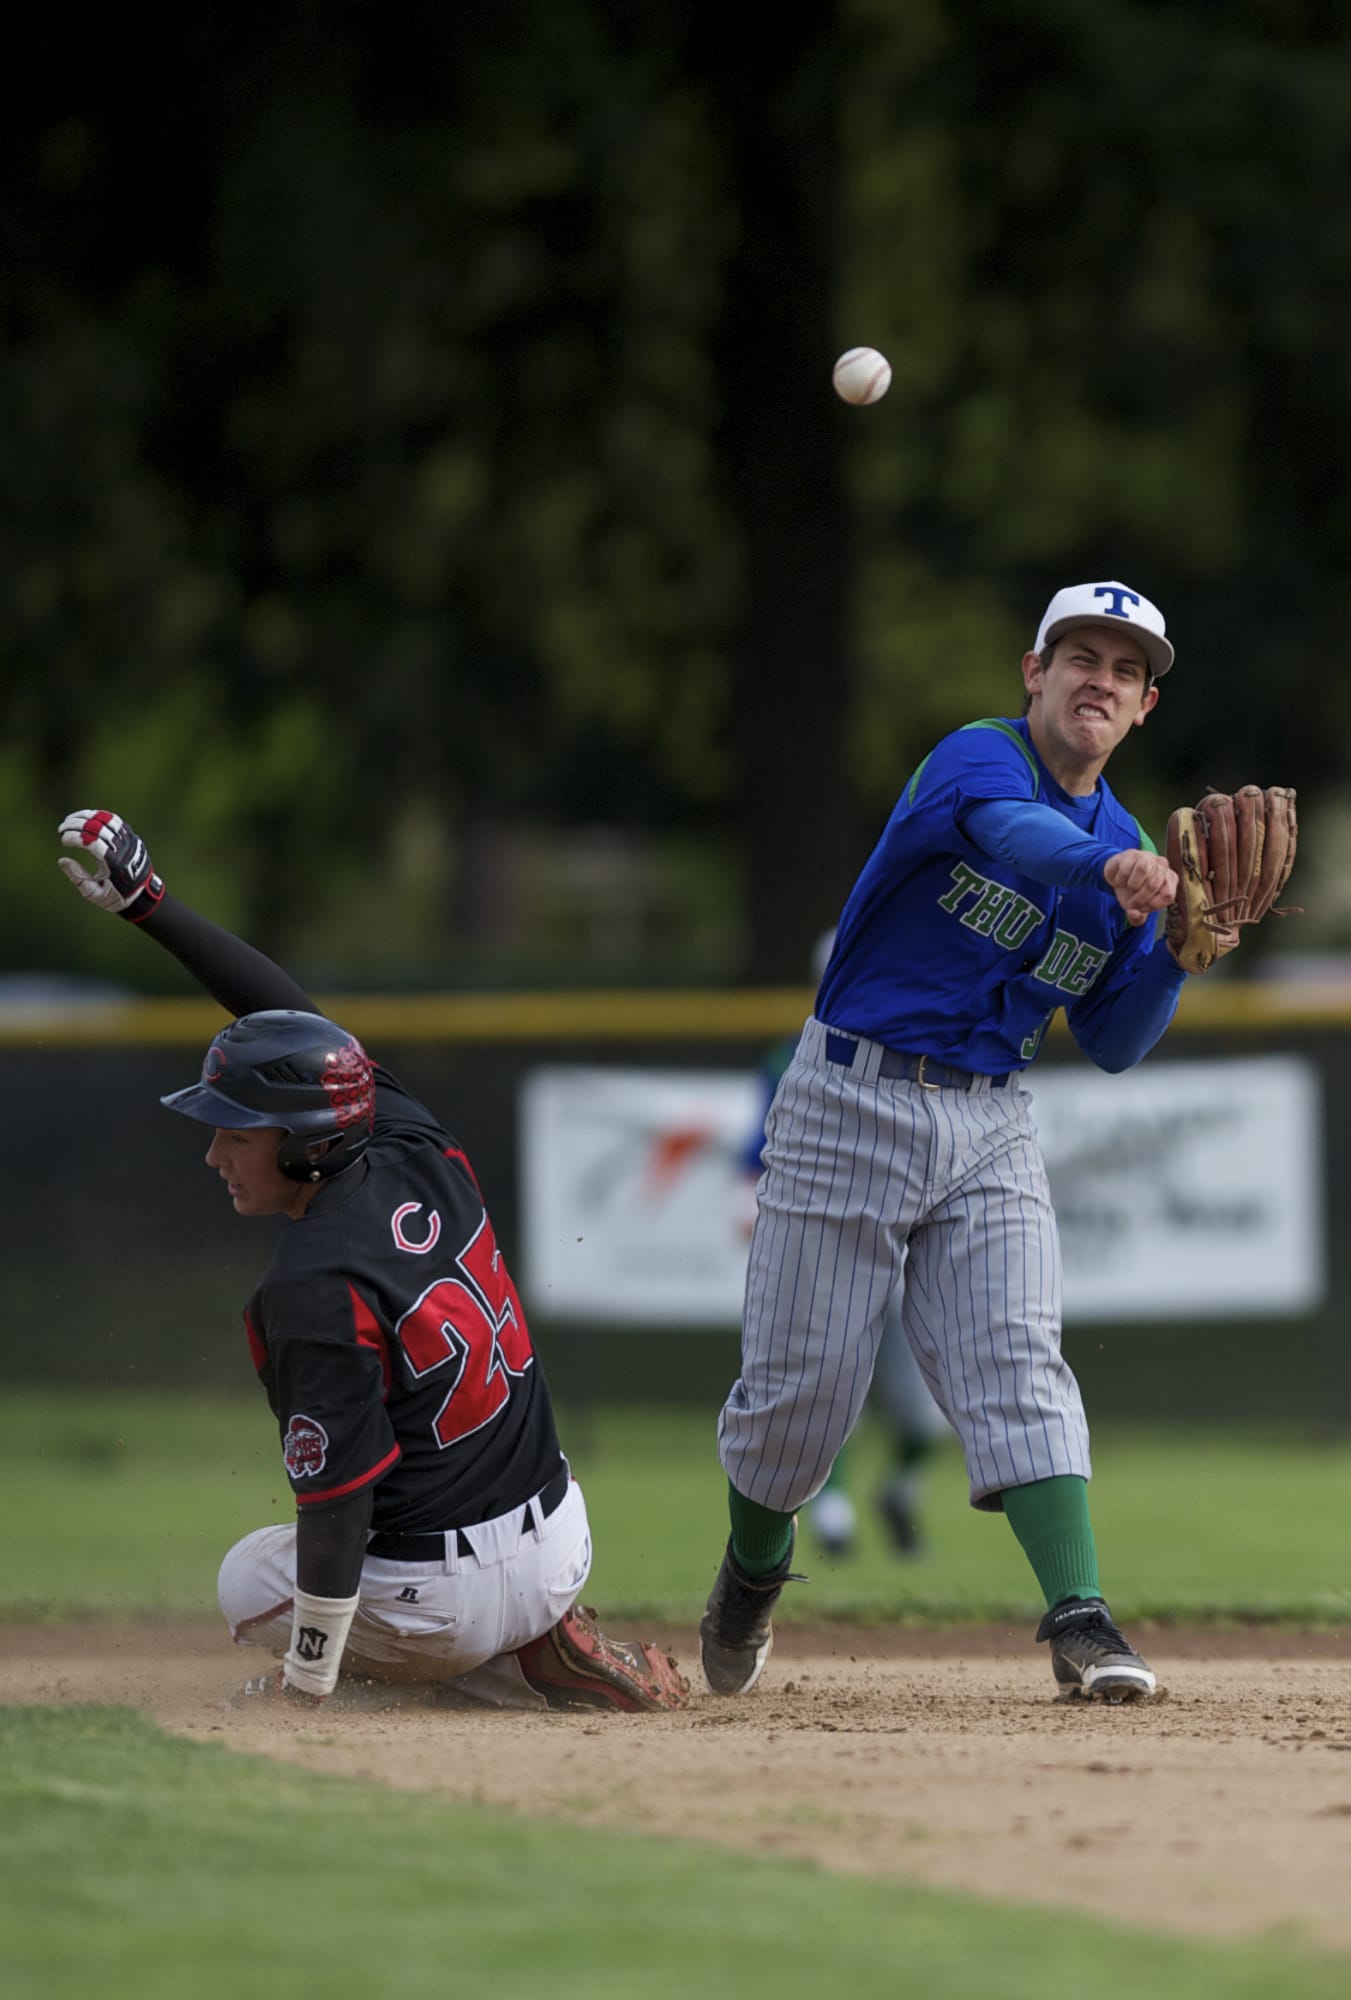 Mountain View's Michael Nino turns a double play after getting out Camas's Jace Schumacher at second base.